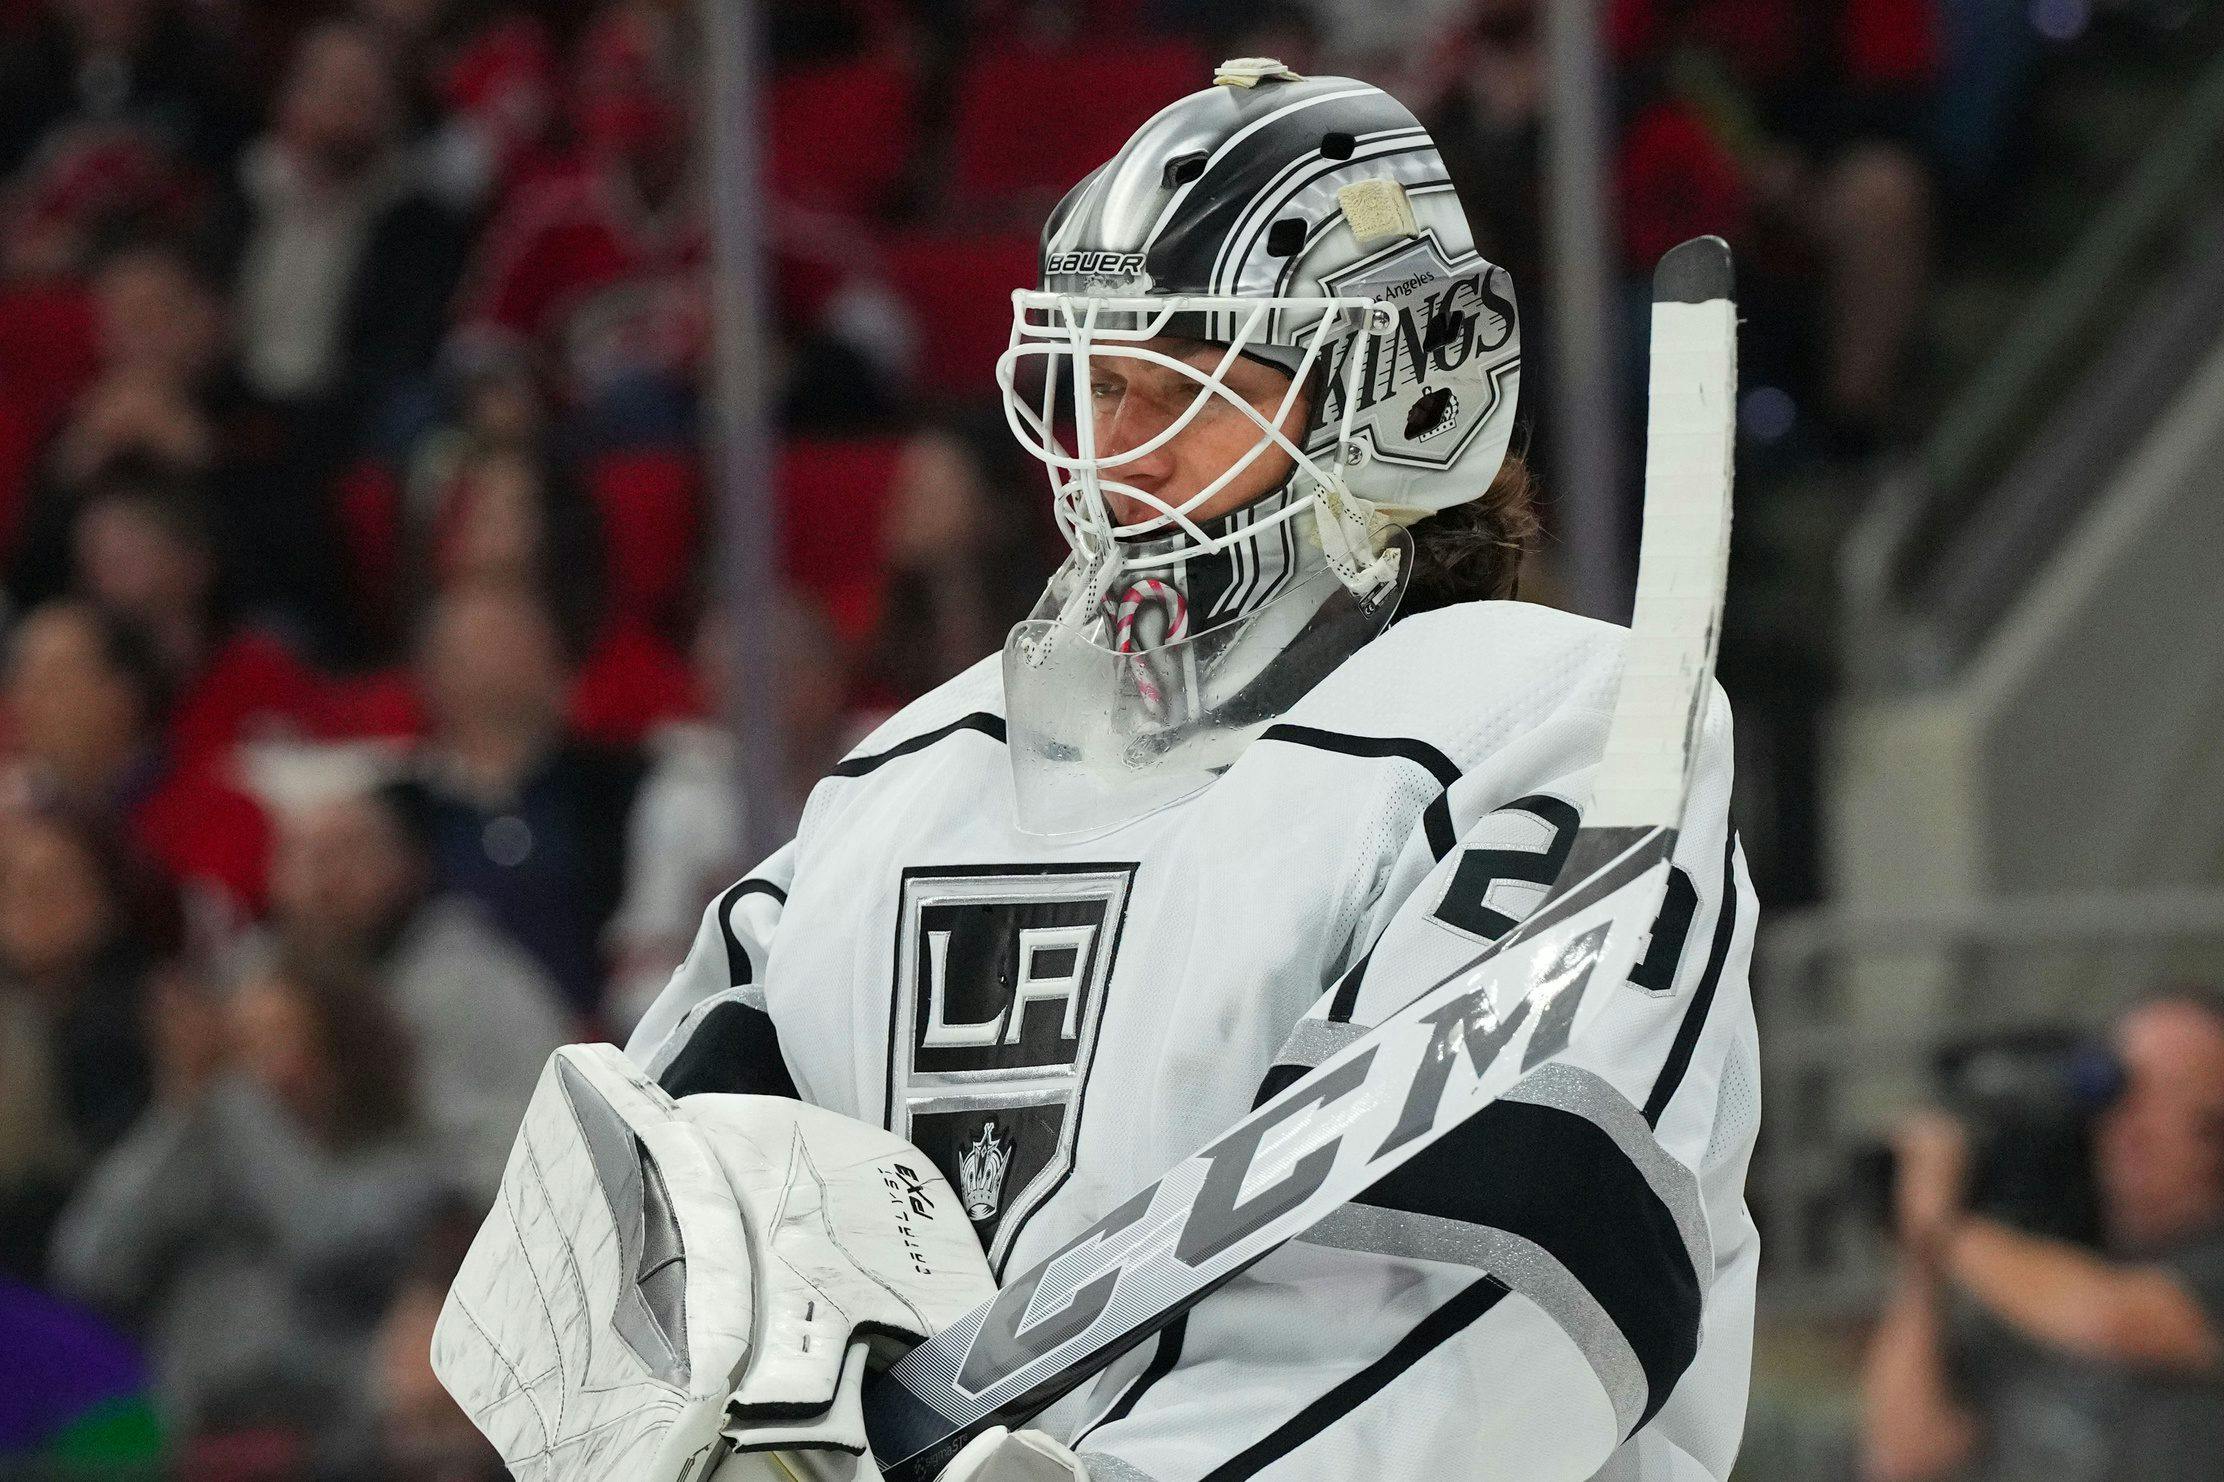 Los Angeles Kings sign Pheonix Copley to one-year, $1.5 million extension